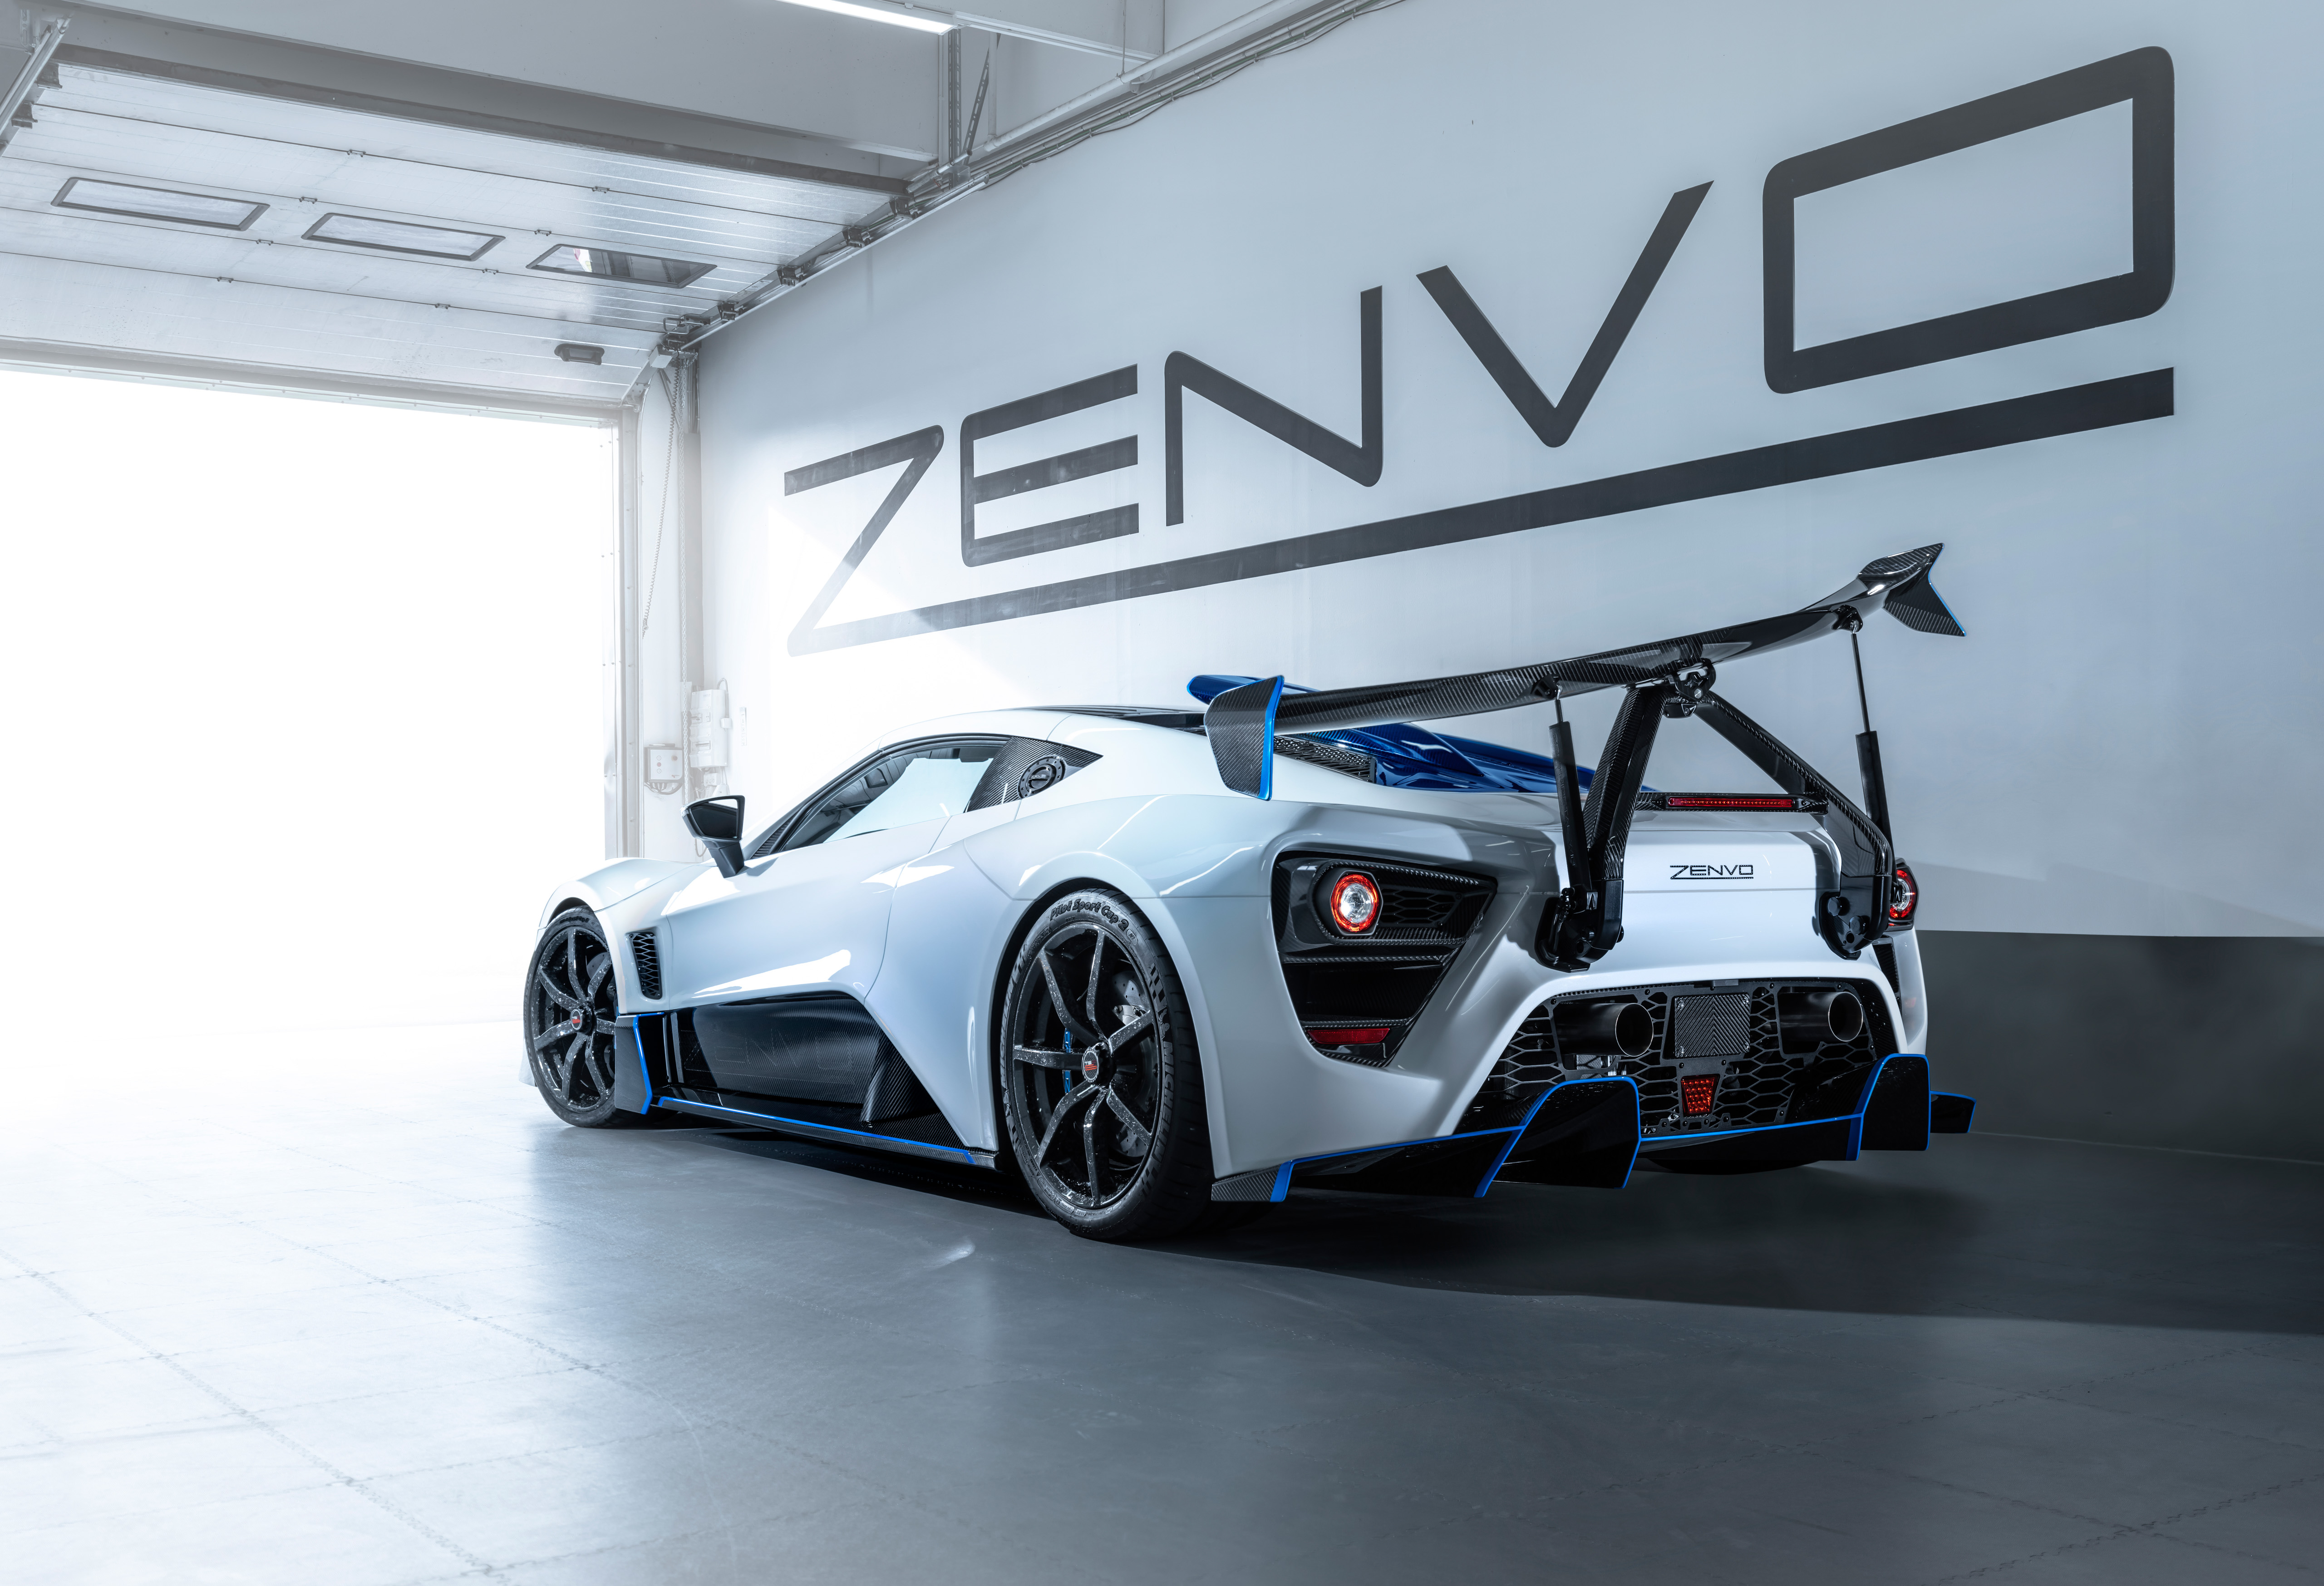 Zenvo tsr s hd cars k wallpapers images backgrounds photos and pictures